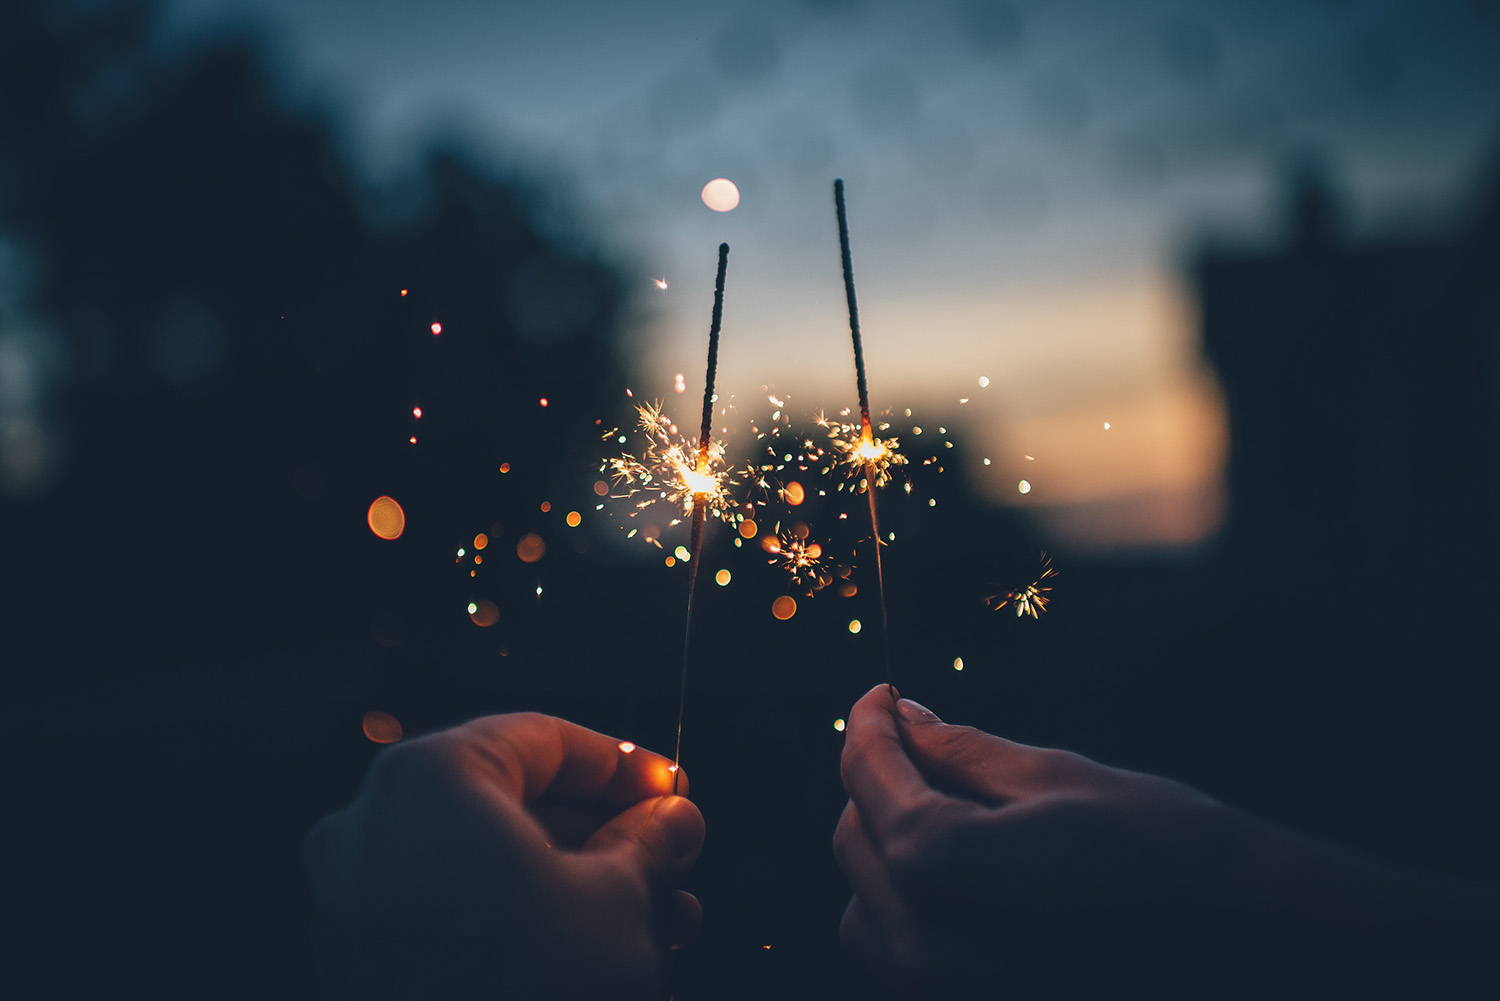 two hands holding candles in new year